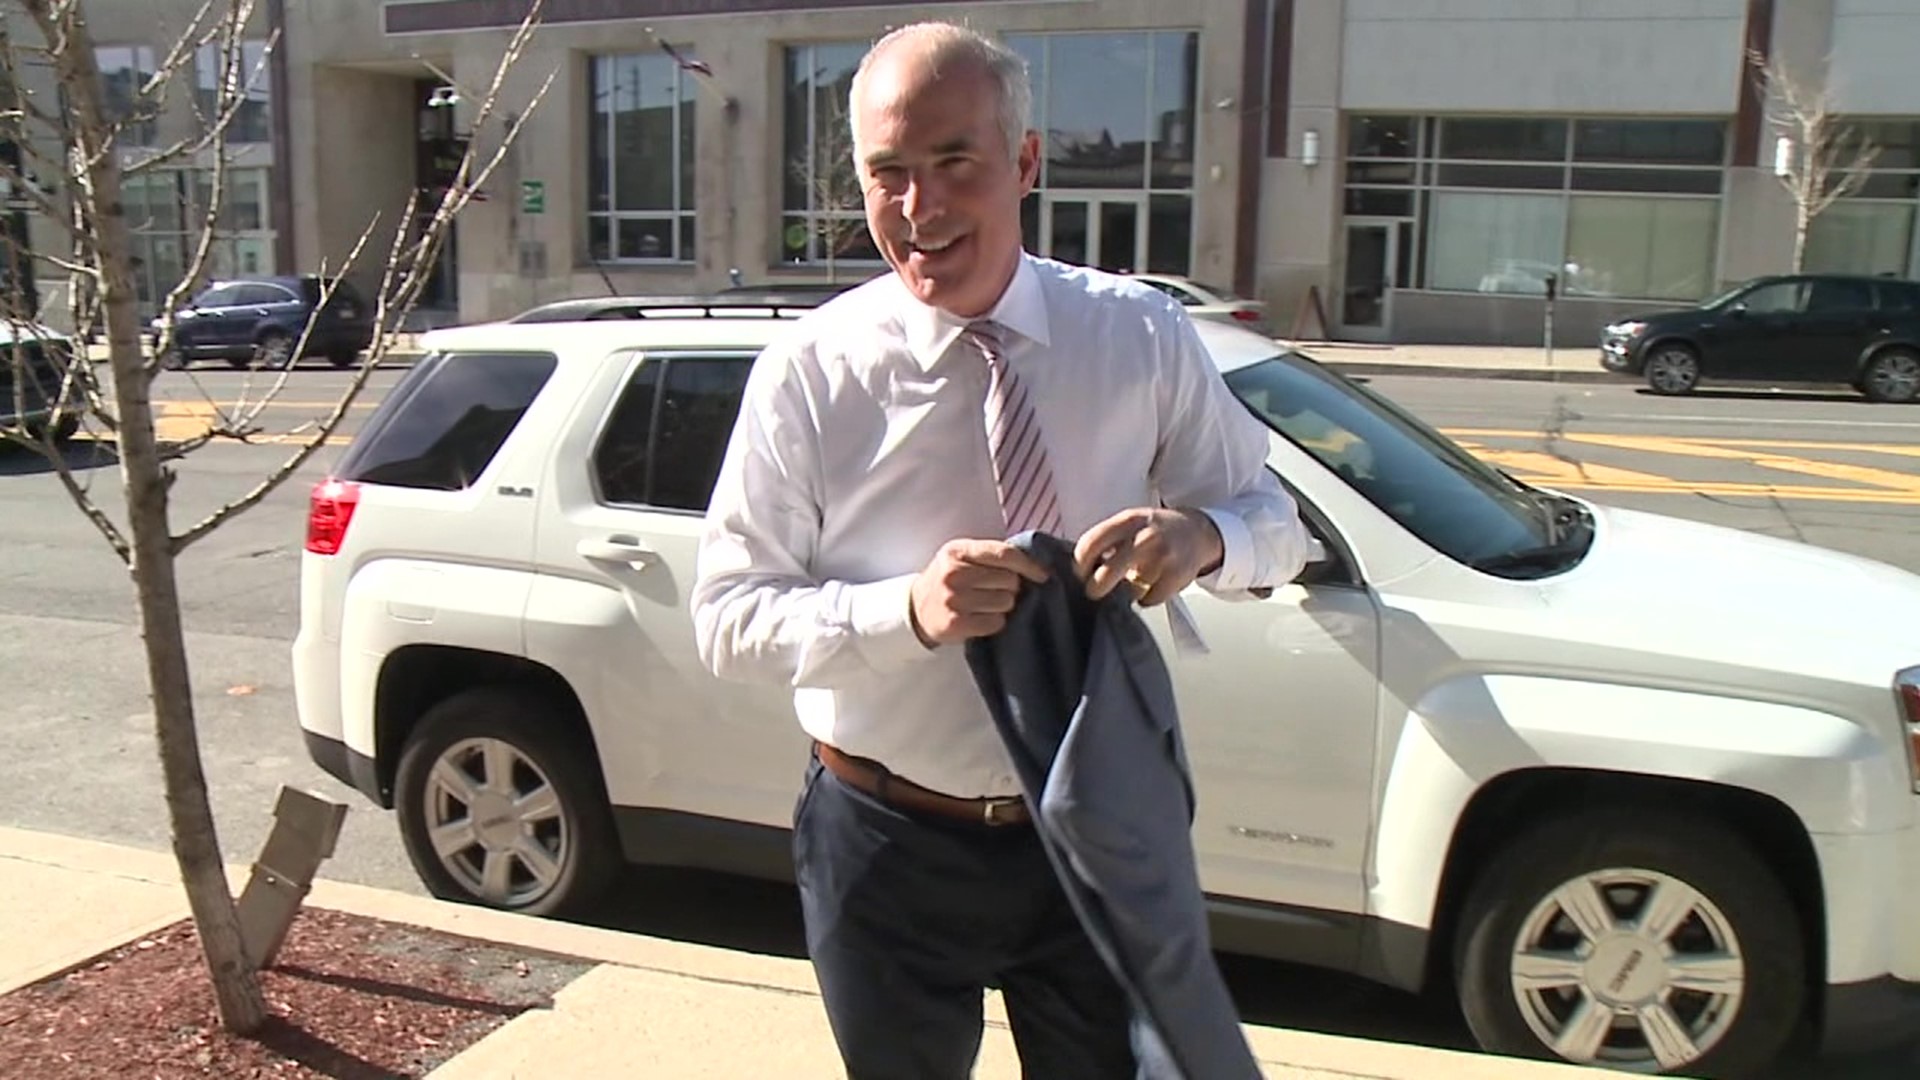 Newswatch 16 caught up with the senator from Scranton on a visit to Hazleton.